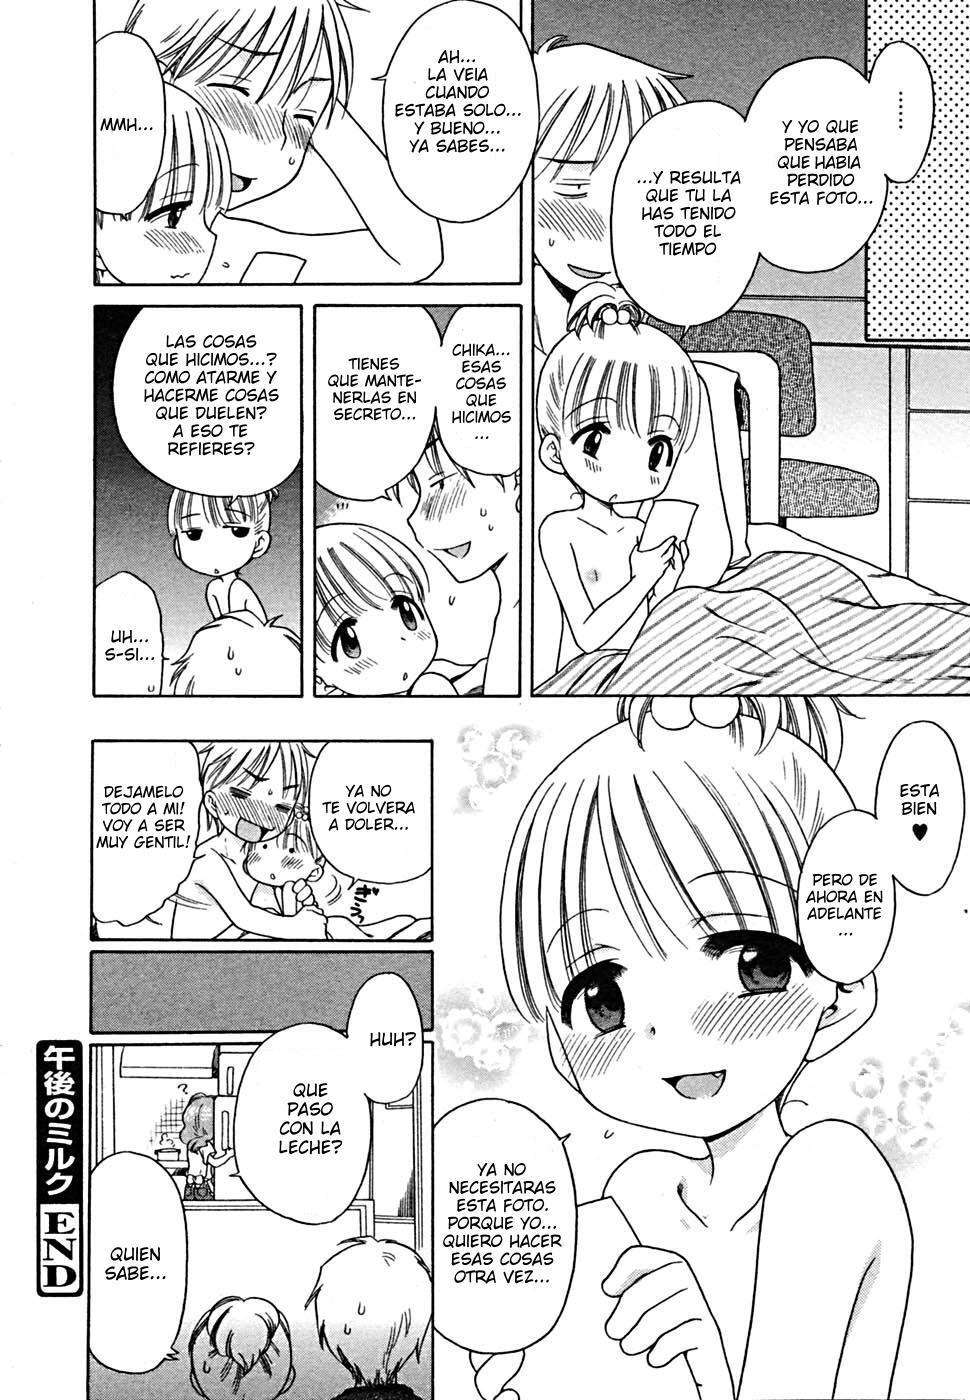 Me gustas Onii-chan! Chapter-3 - 15